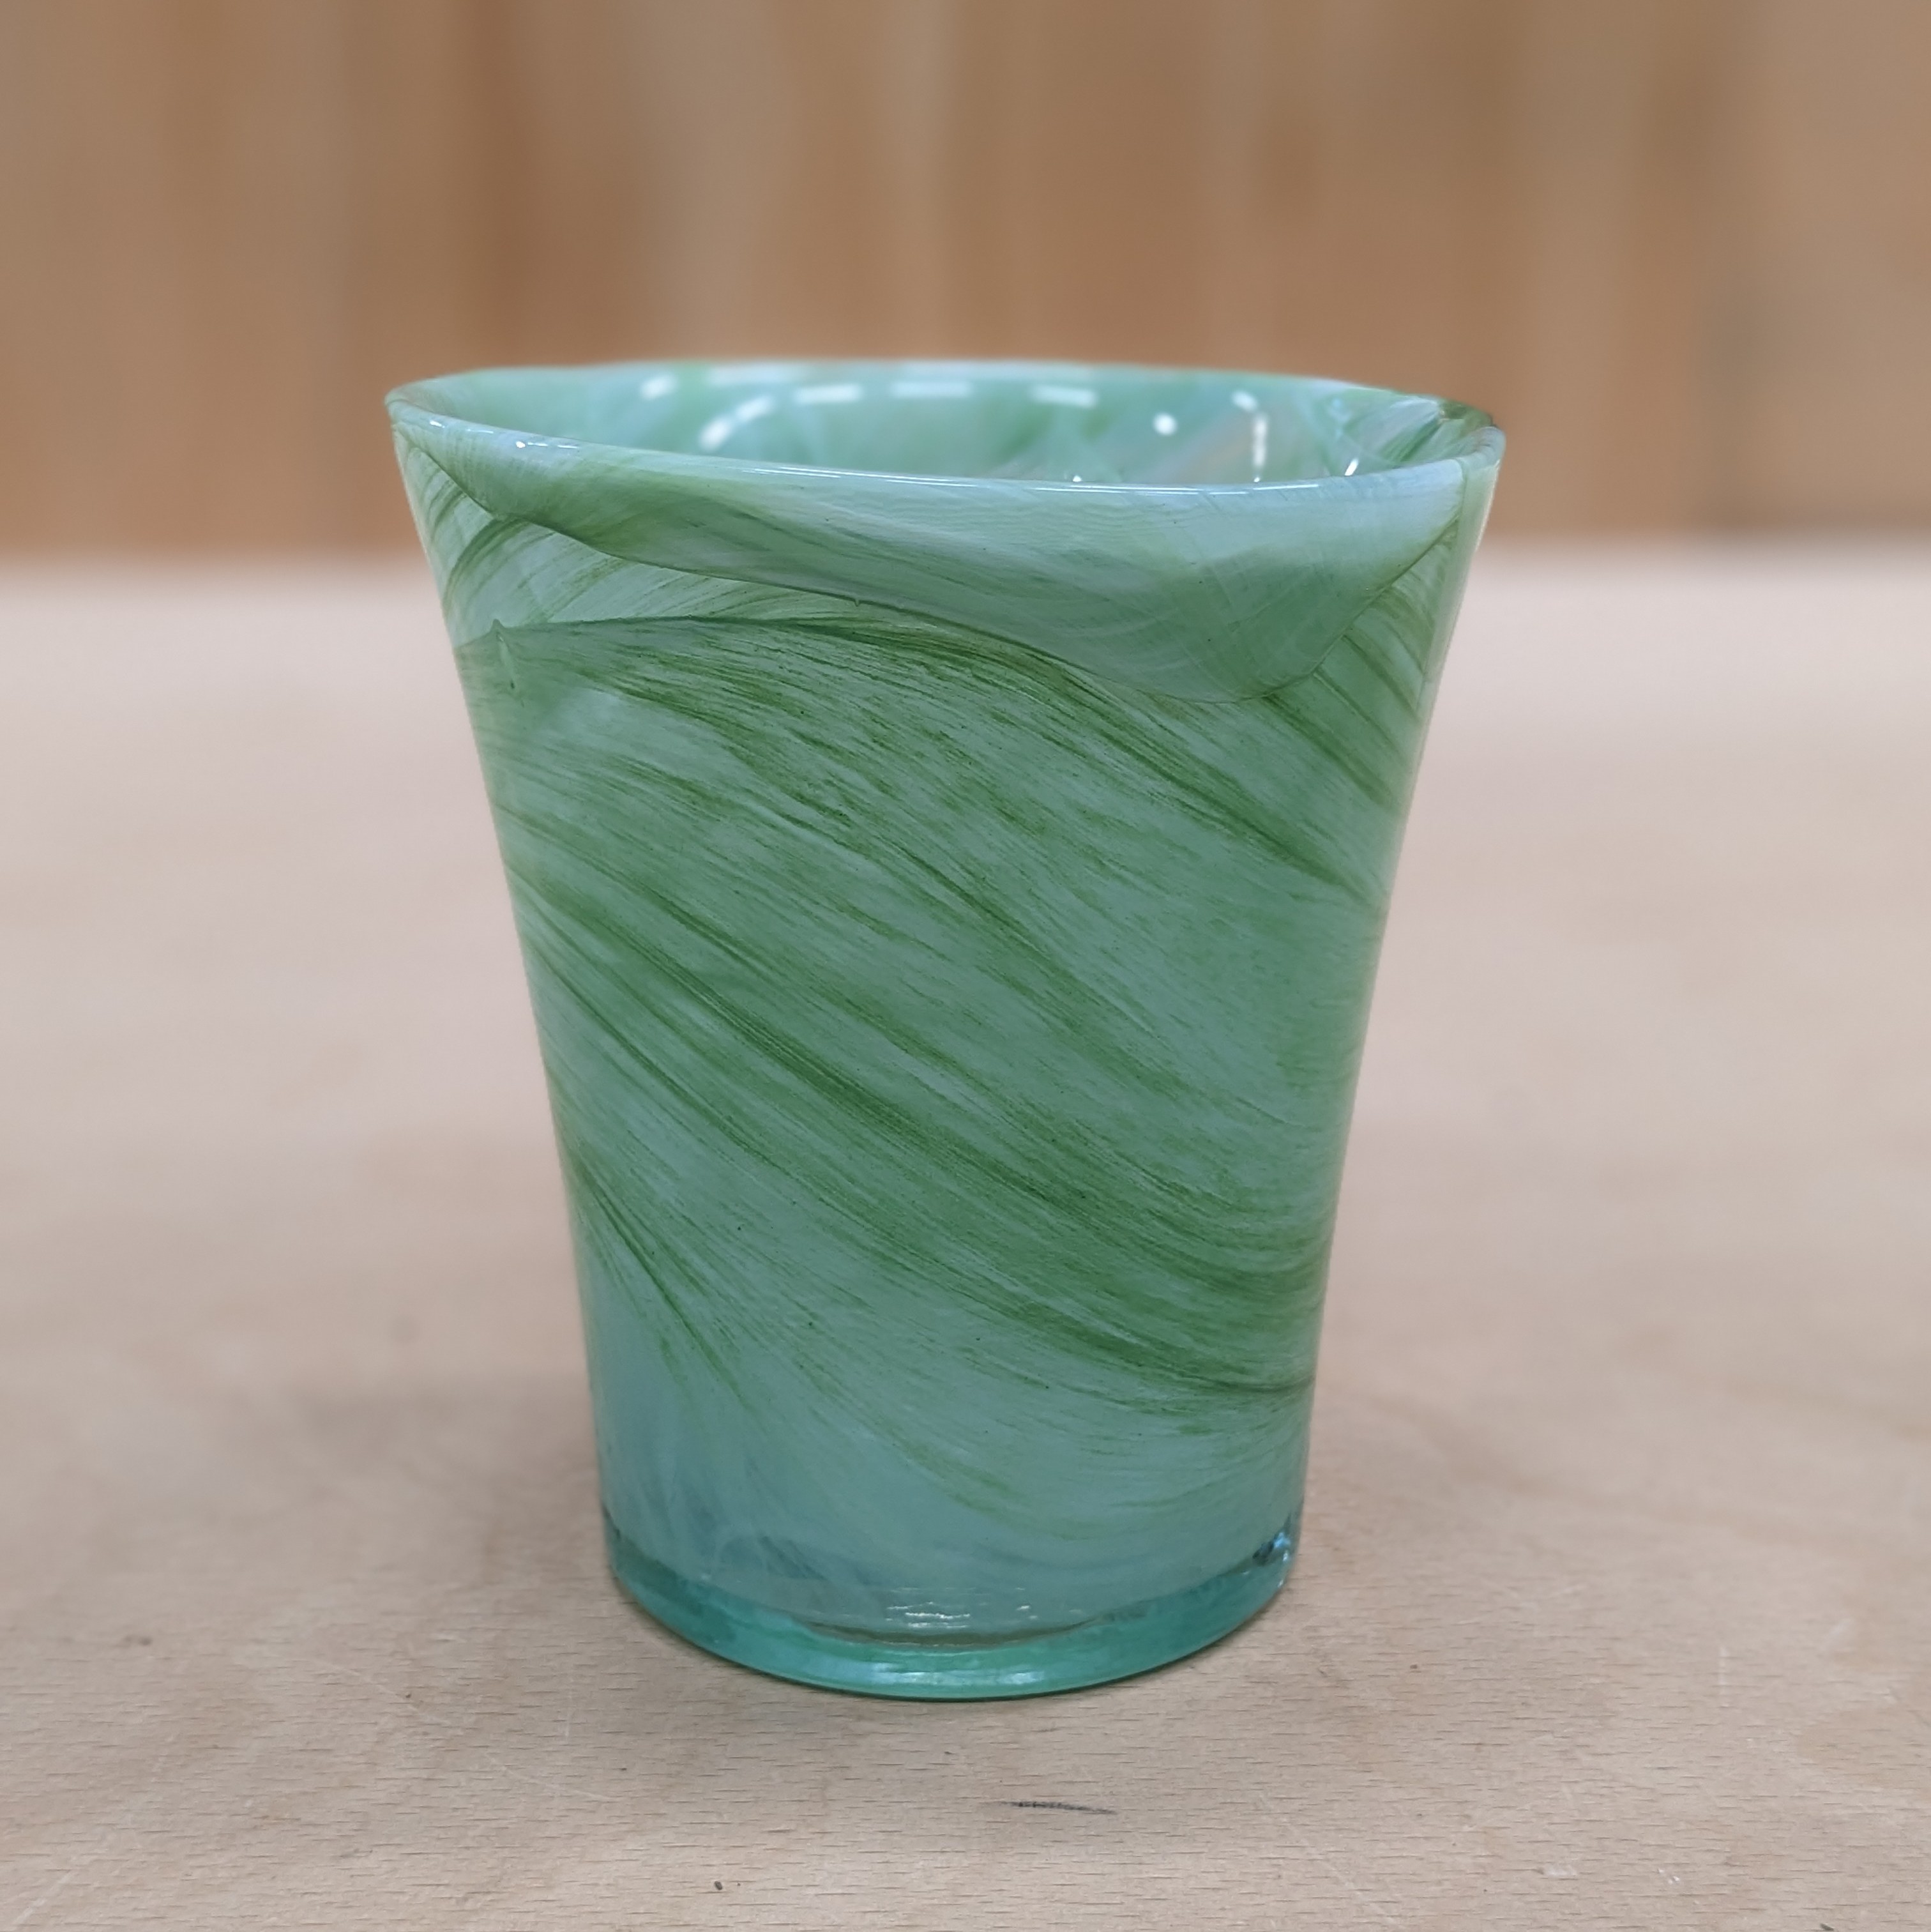 Green glass marbled vase patterned swirl design view